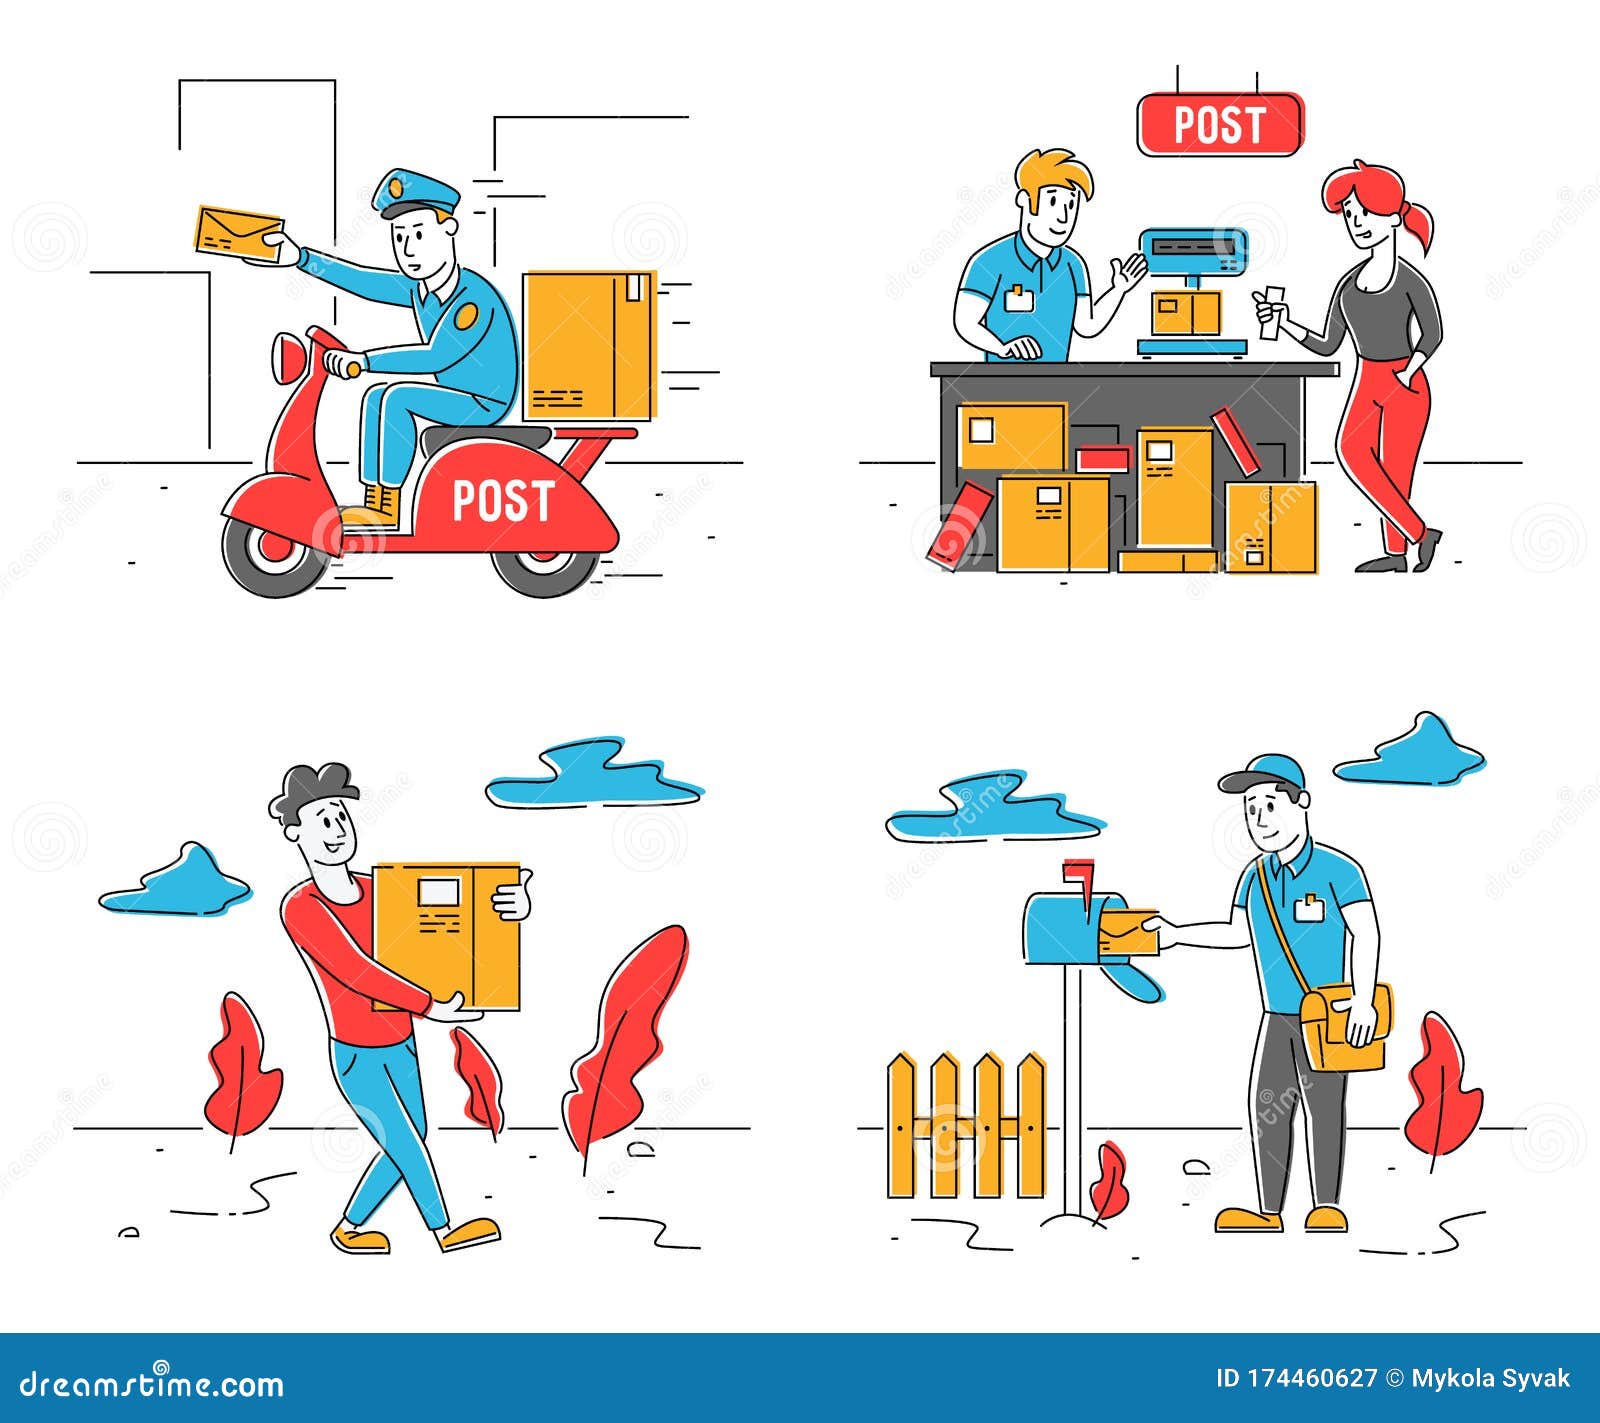 Post Office Workers and Clients Set. People Receiving and Sending Mail,  Postman Weigh and Delivering Packages Stock Vector - Illustration of cartoon,  occupation: 174460627